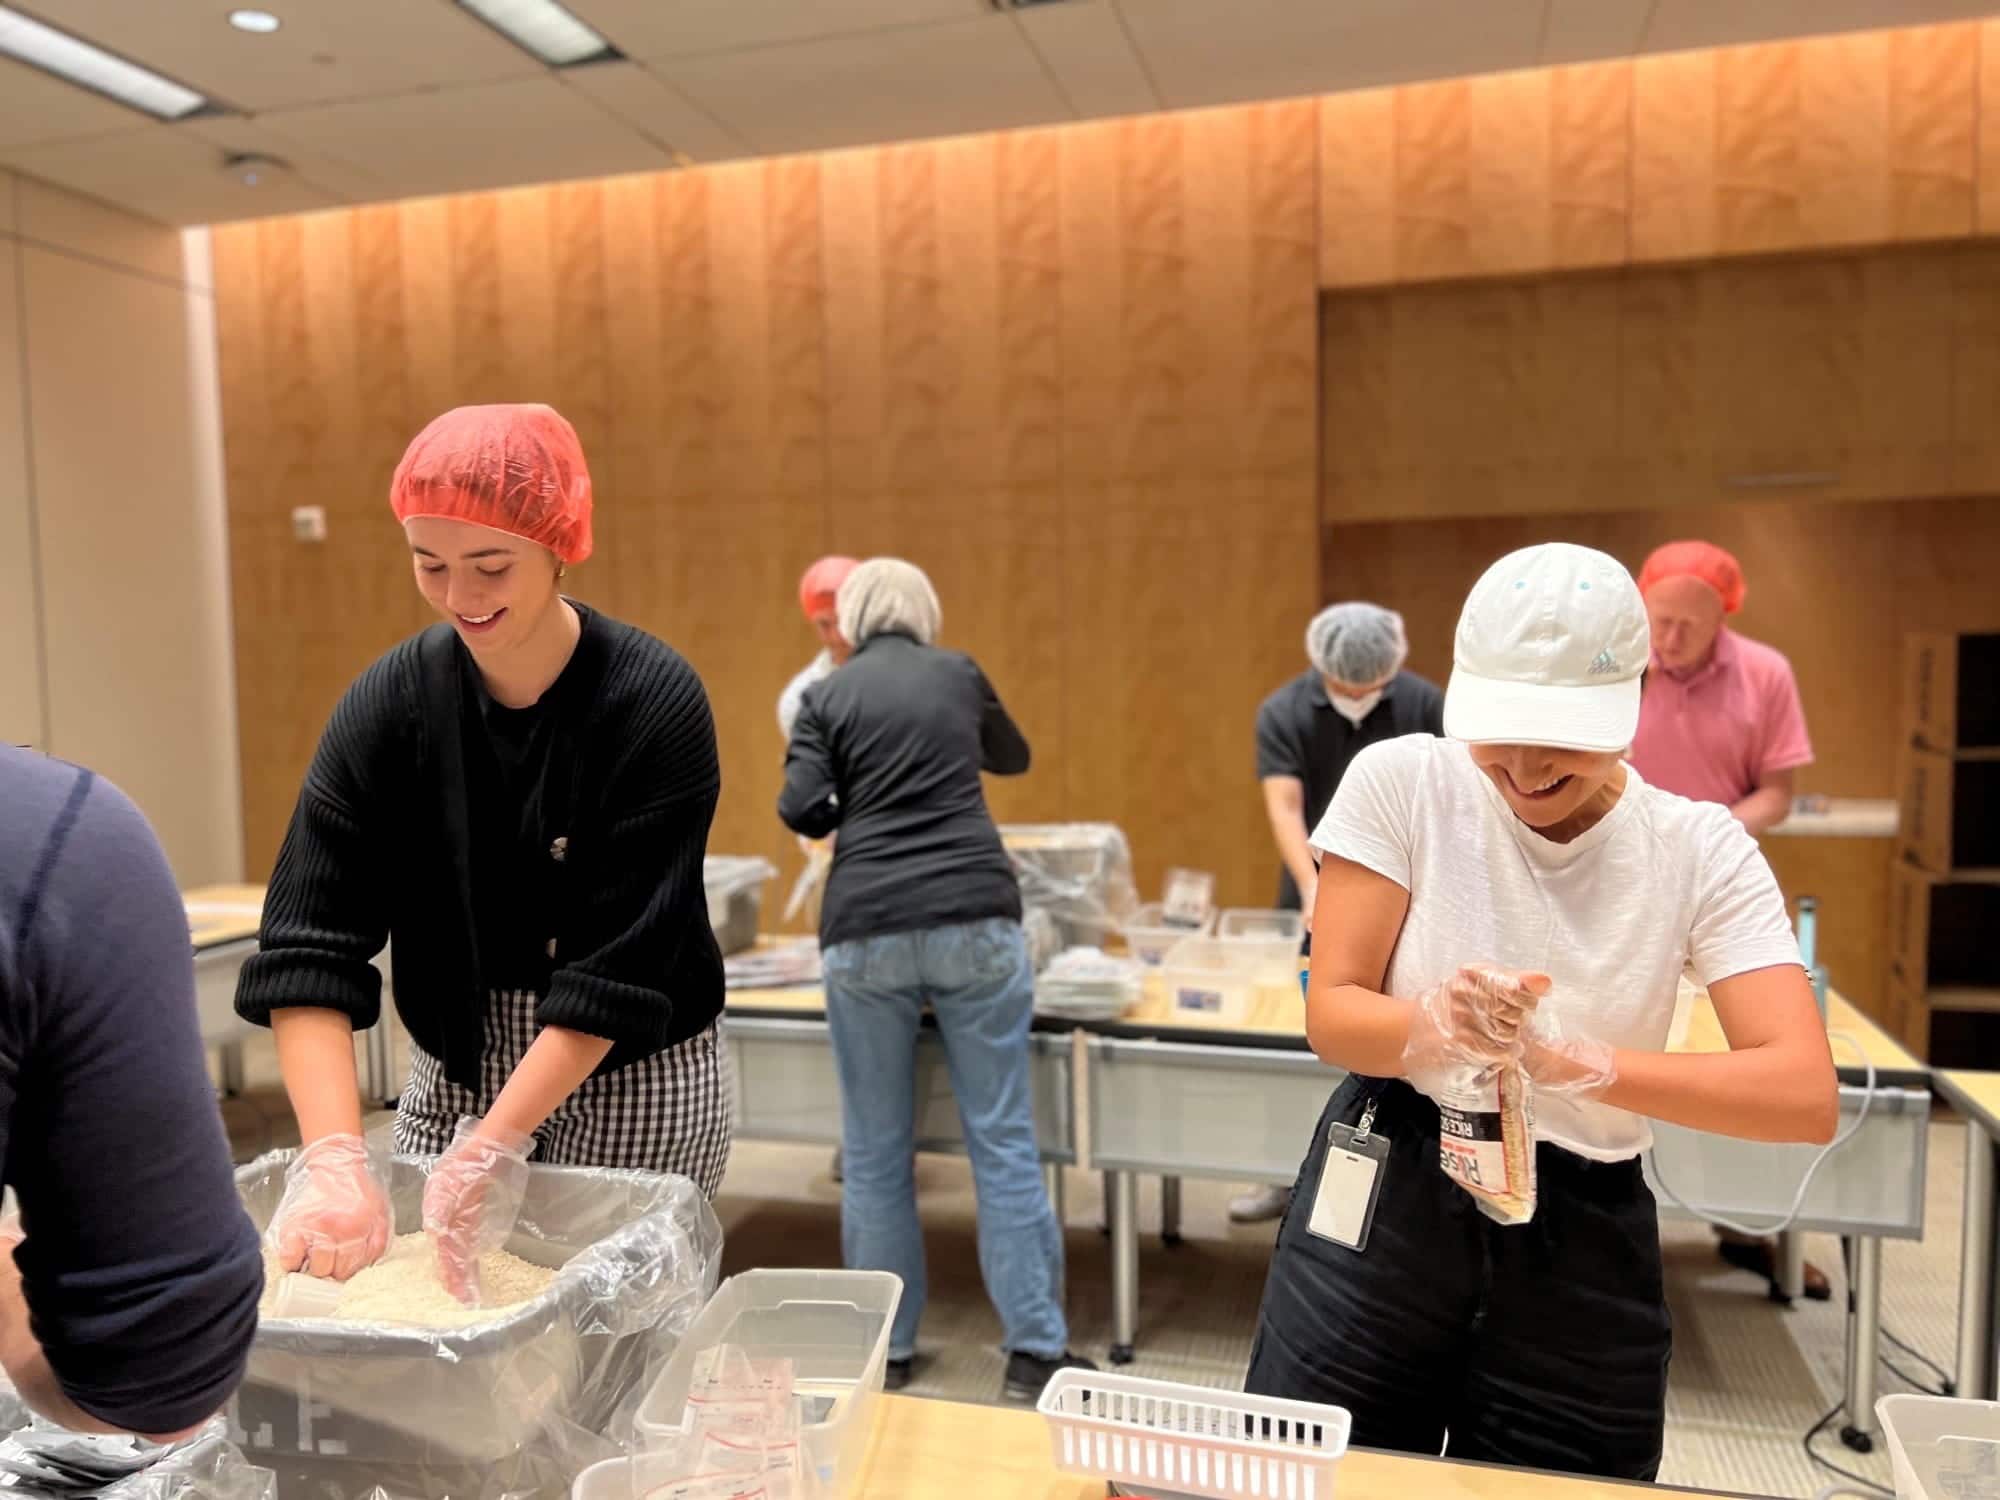 Volunteering with Rise Against Hunger